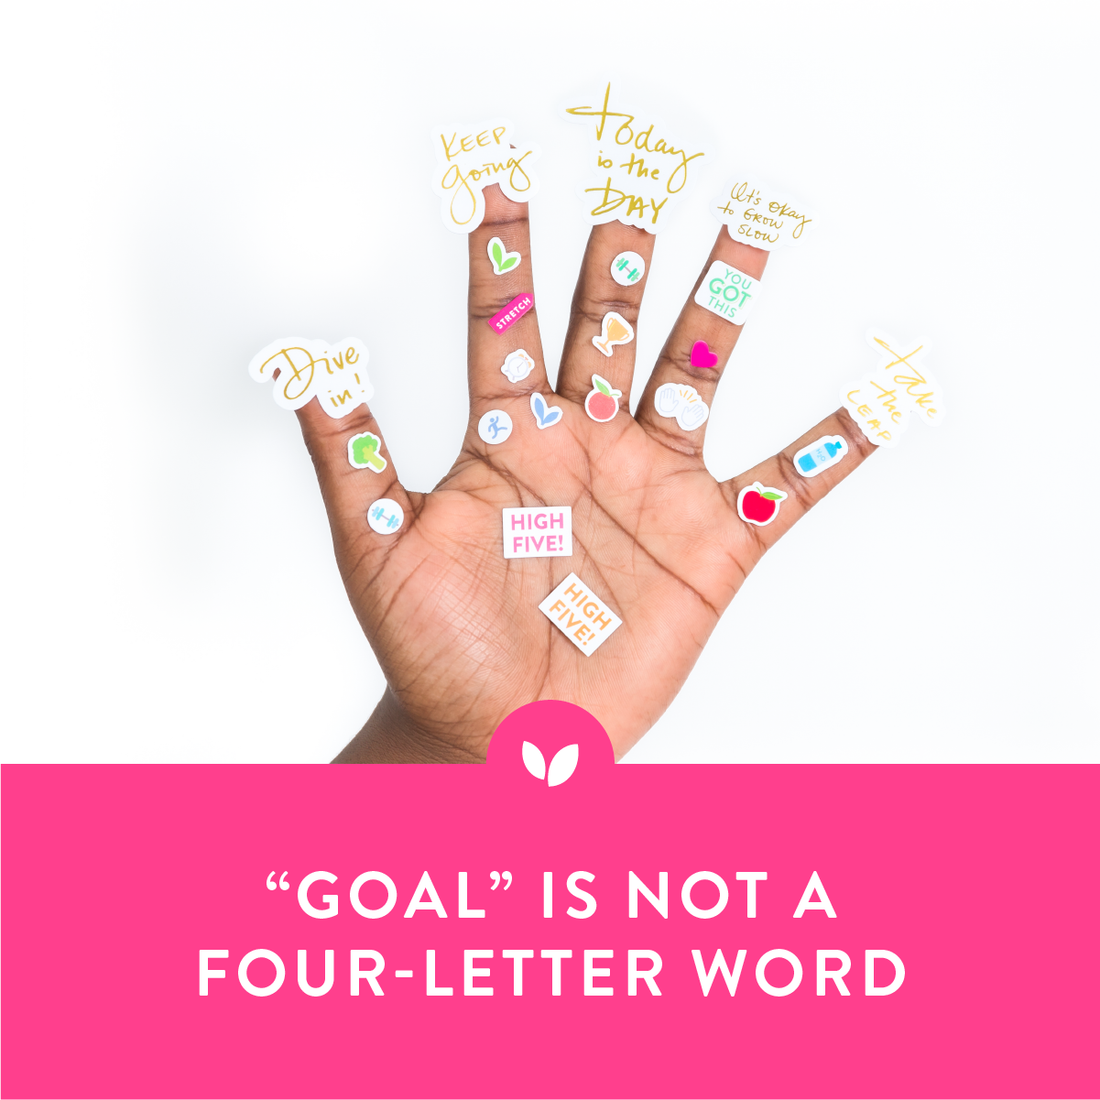 GOAL is Not a Four-Letter Word